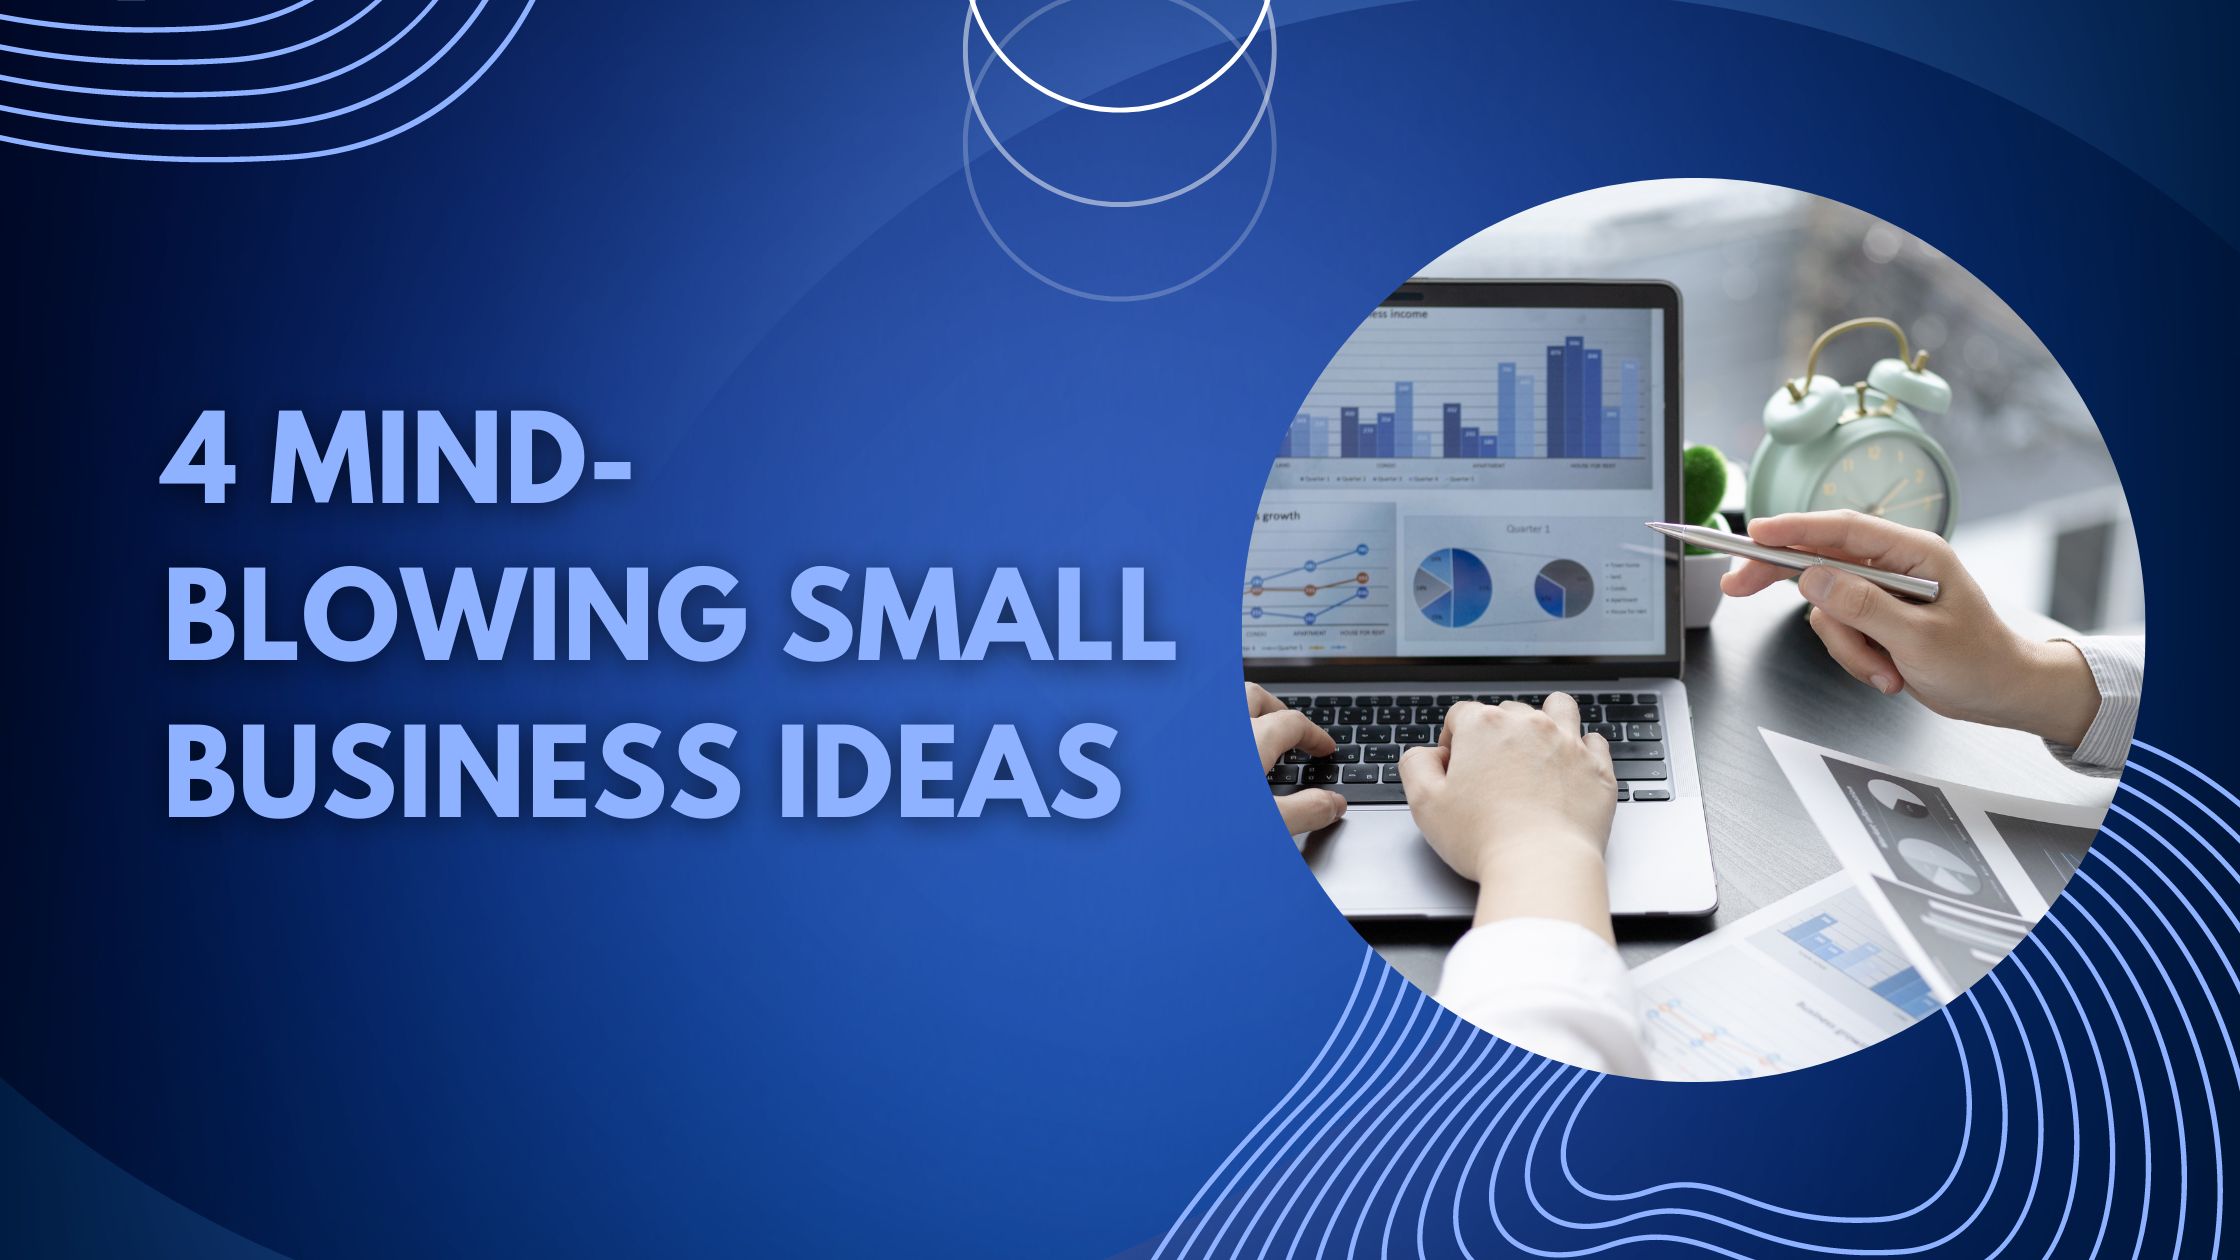 4 mind-blowing small business ideas